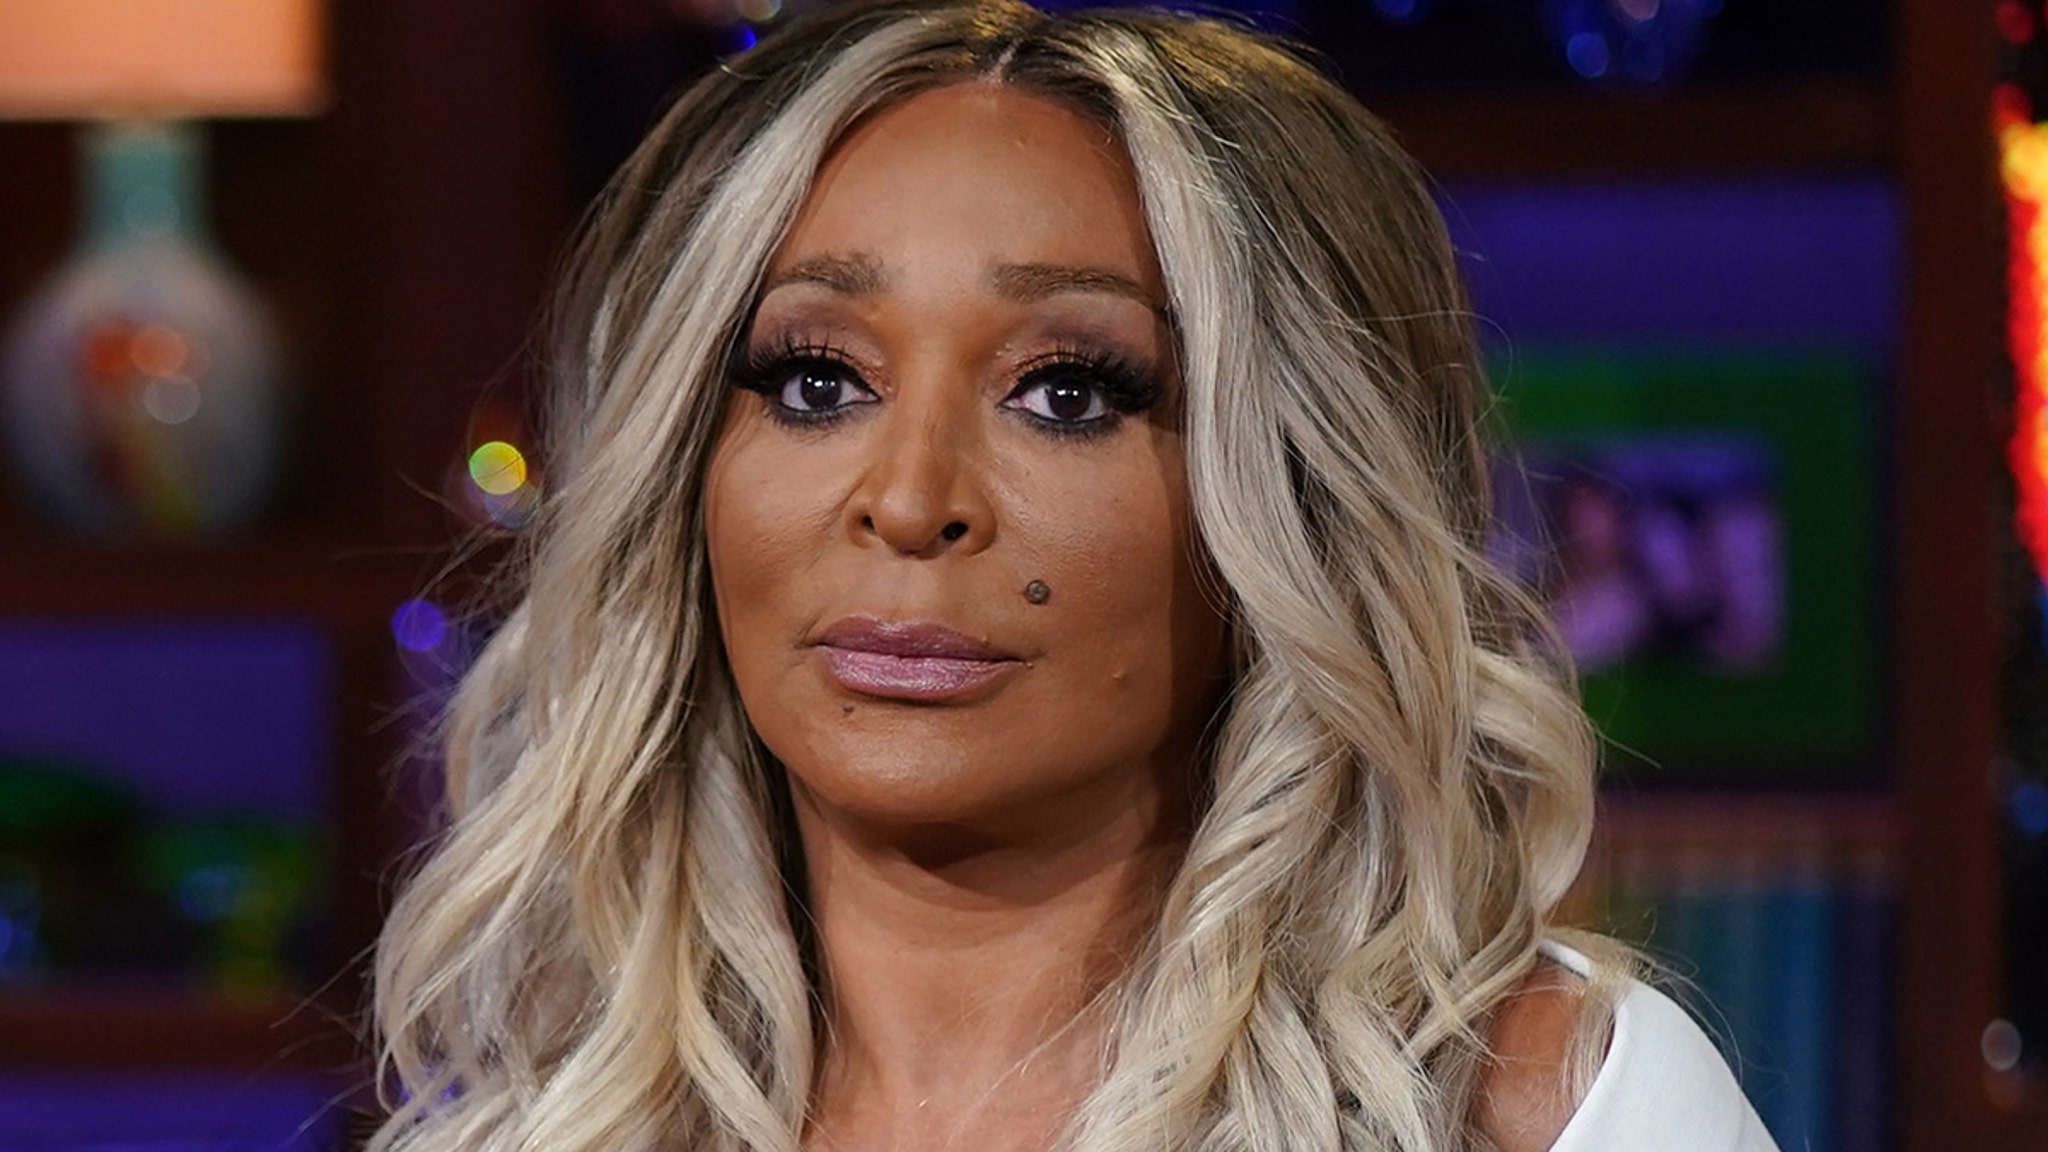 ‘RHOP’ Star Karen Huger Charged with DUI In Connection to Car Crash